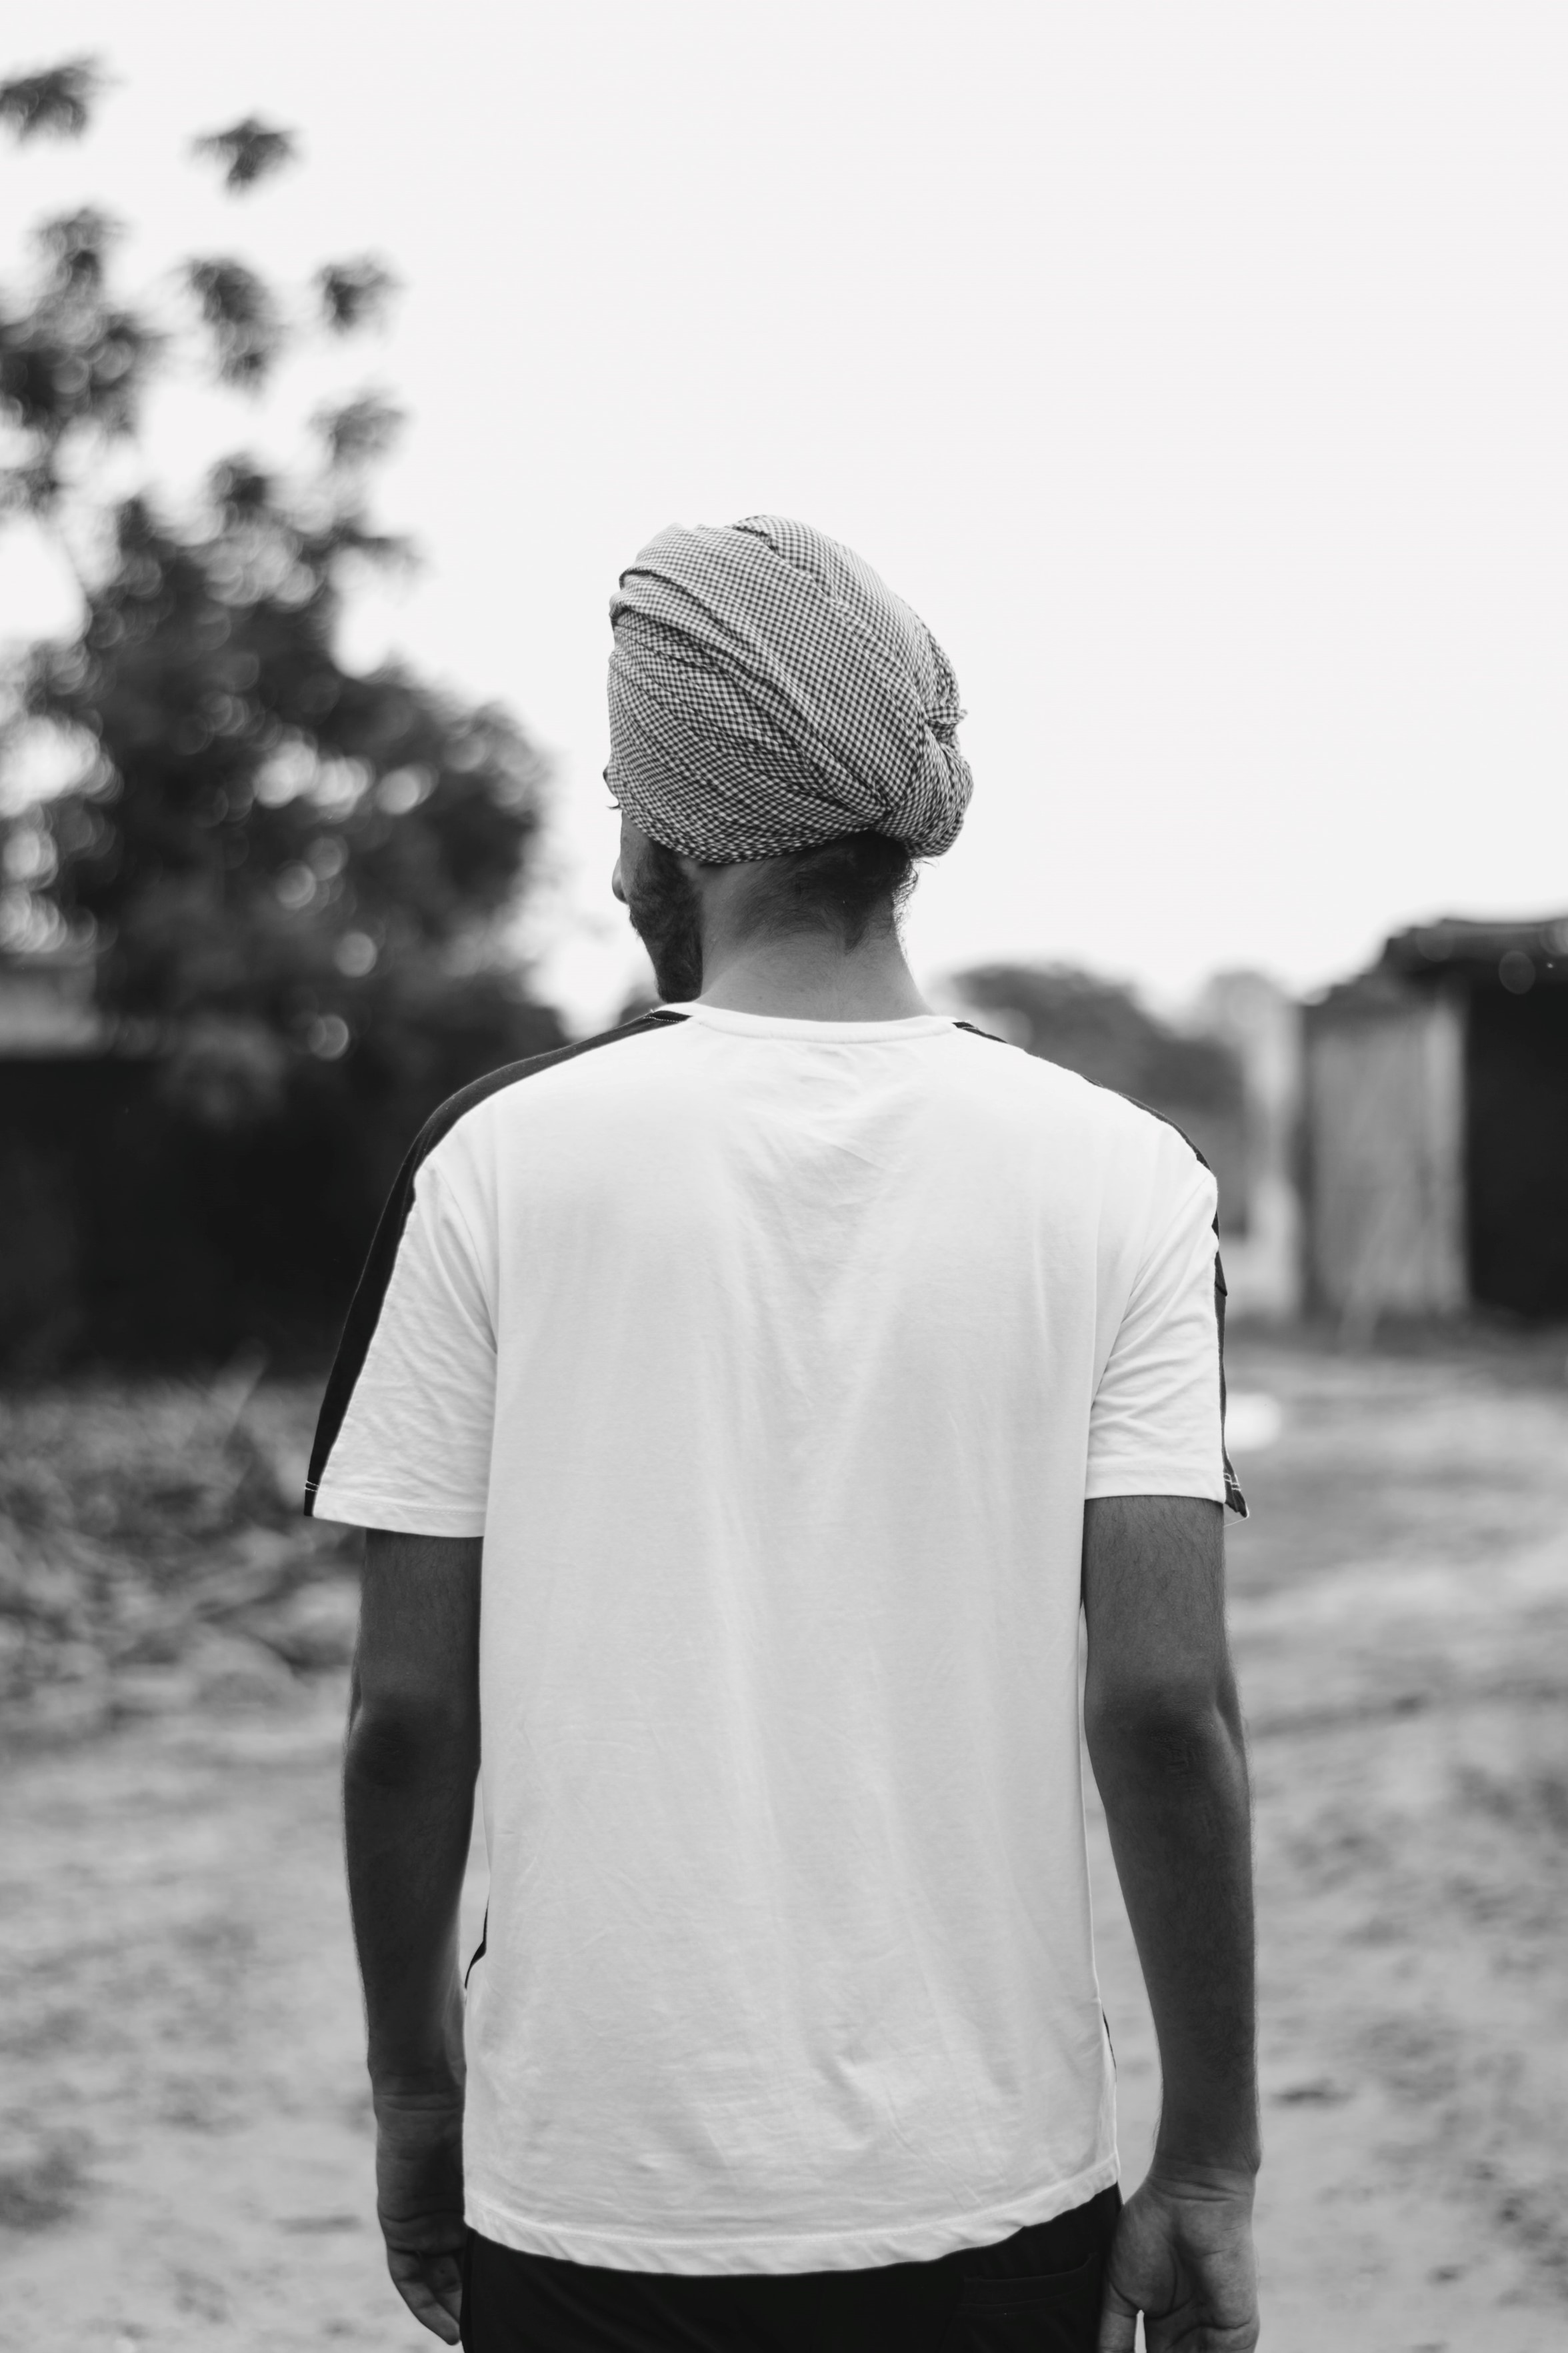 Sikh man in black and white facing away from camera